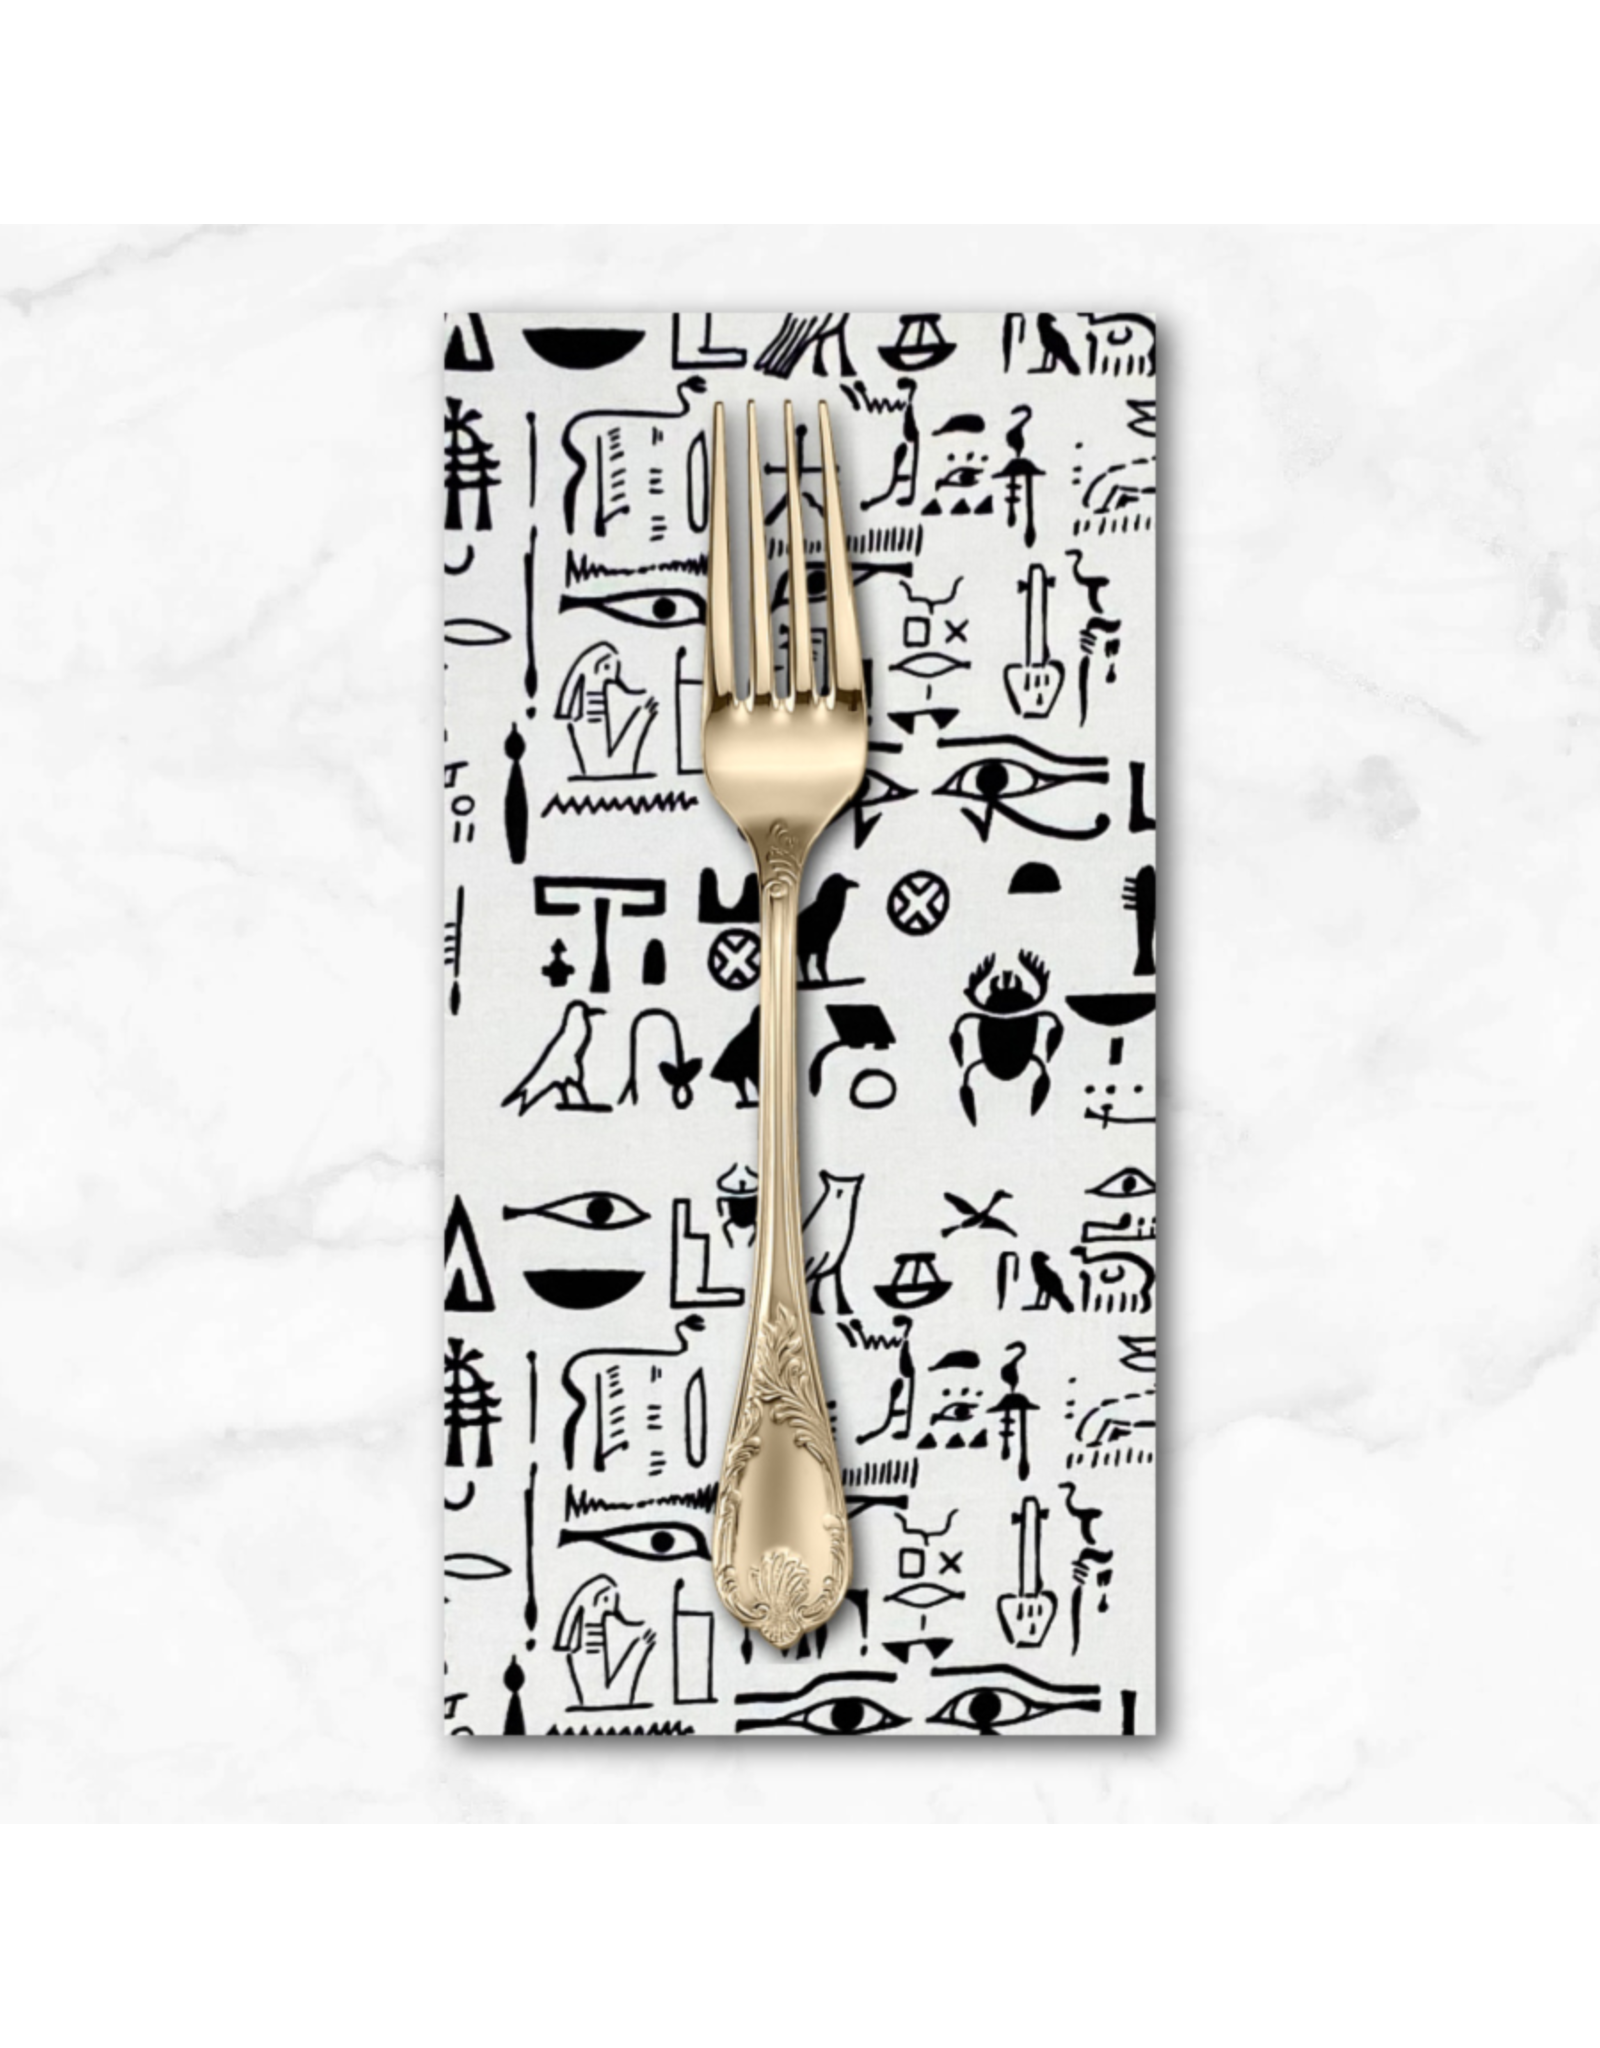 PD's Alexander Henry Collection Wish You Were Here, Hieroglyphs in Natural, Dinner Napkin